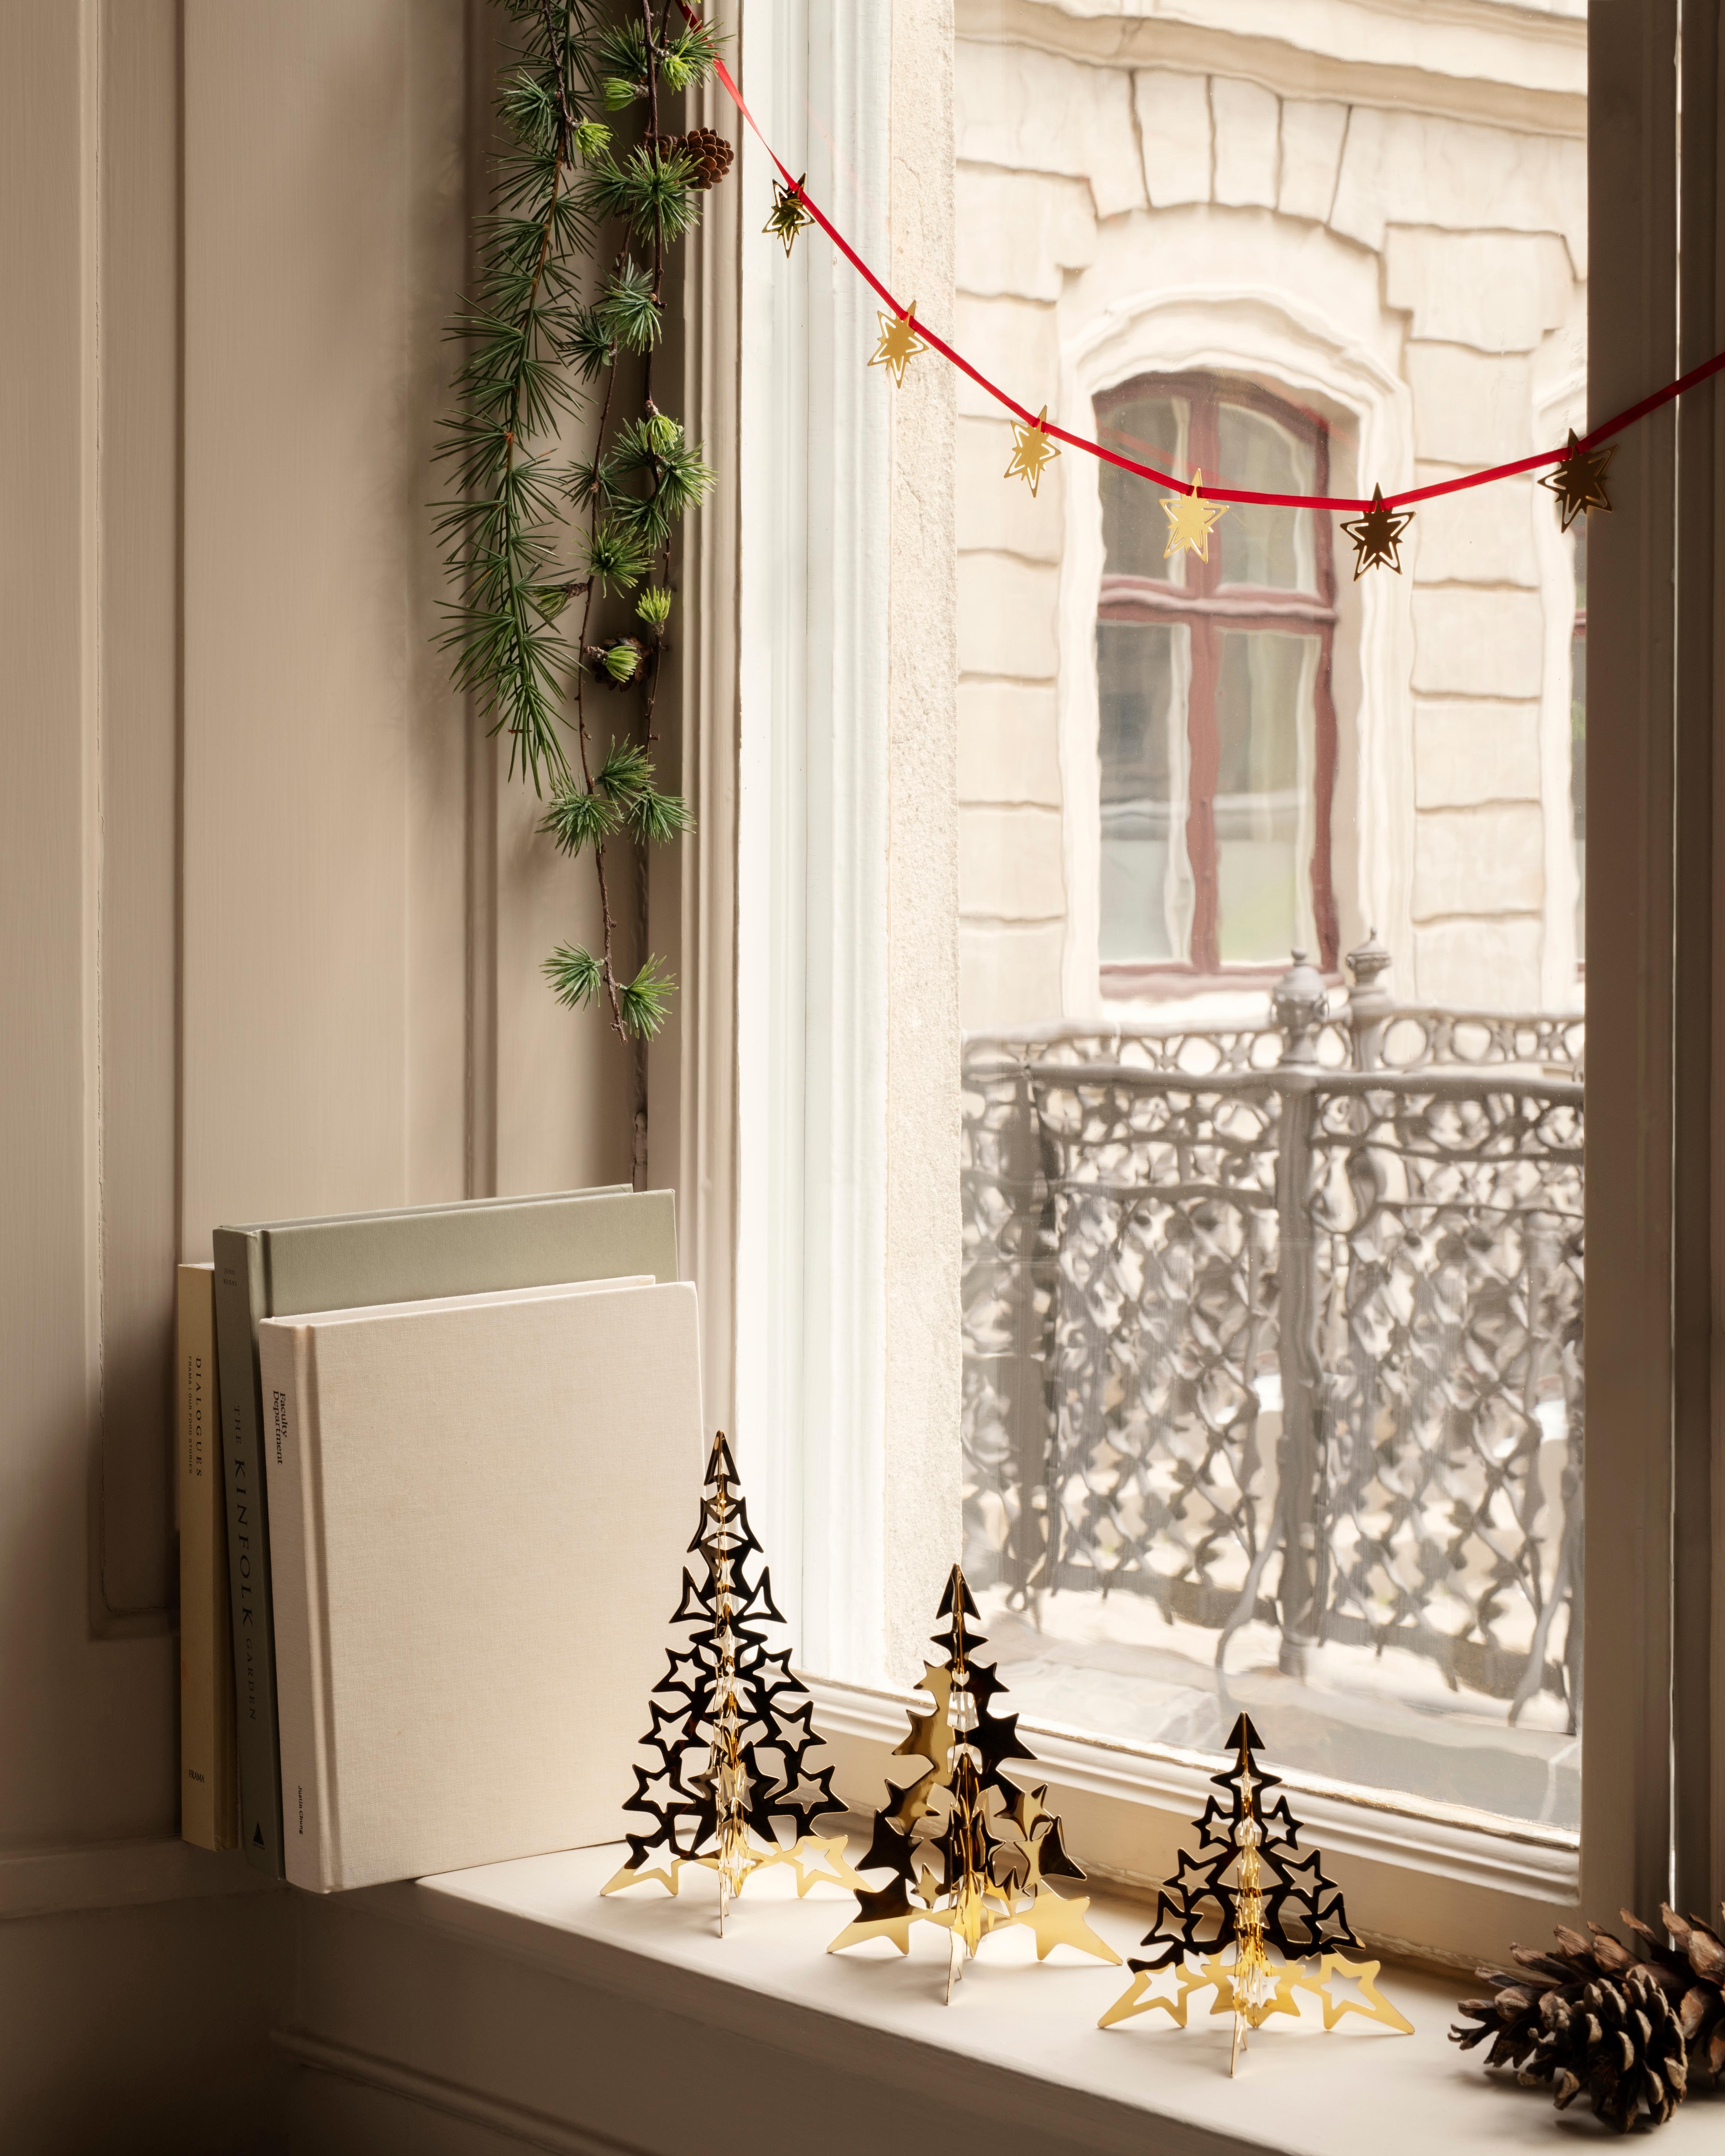 A contemporary take on a Christmas tree, this modernist version is created by abstracted shooting stars, coming together to form a stylish centerpiece. Plated in 18 karat gold, the surface of the stars reflect the lights in the room creating a